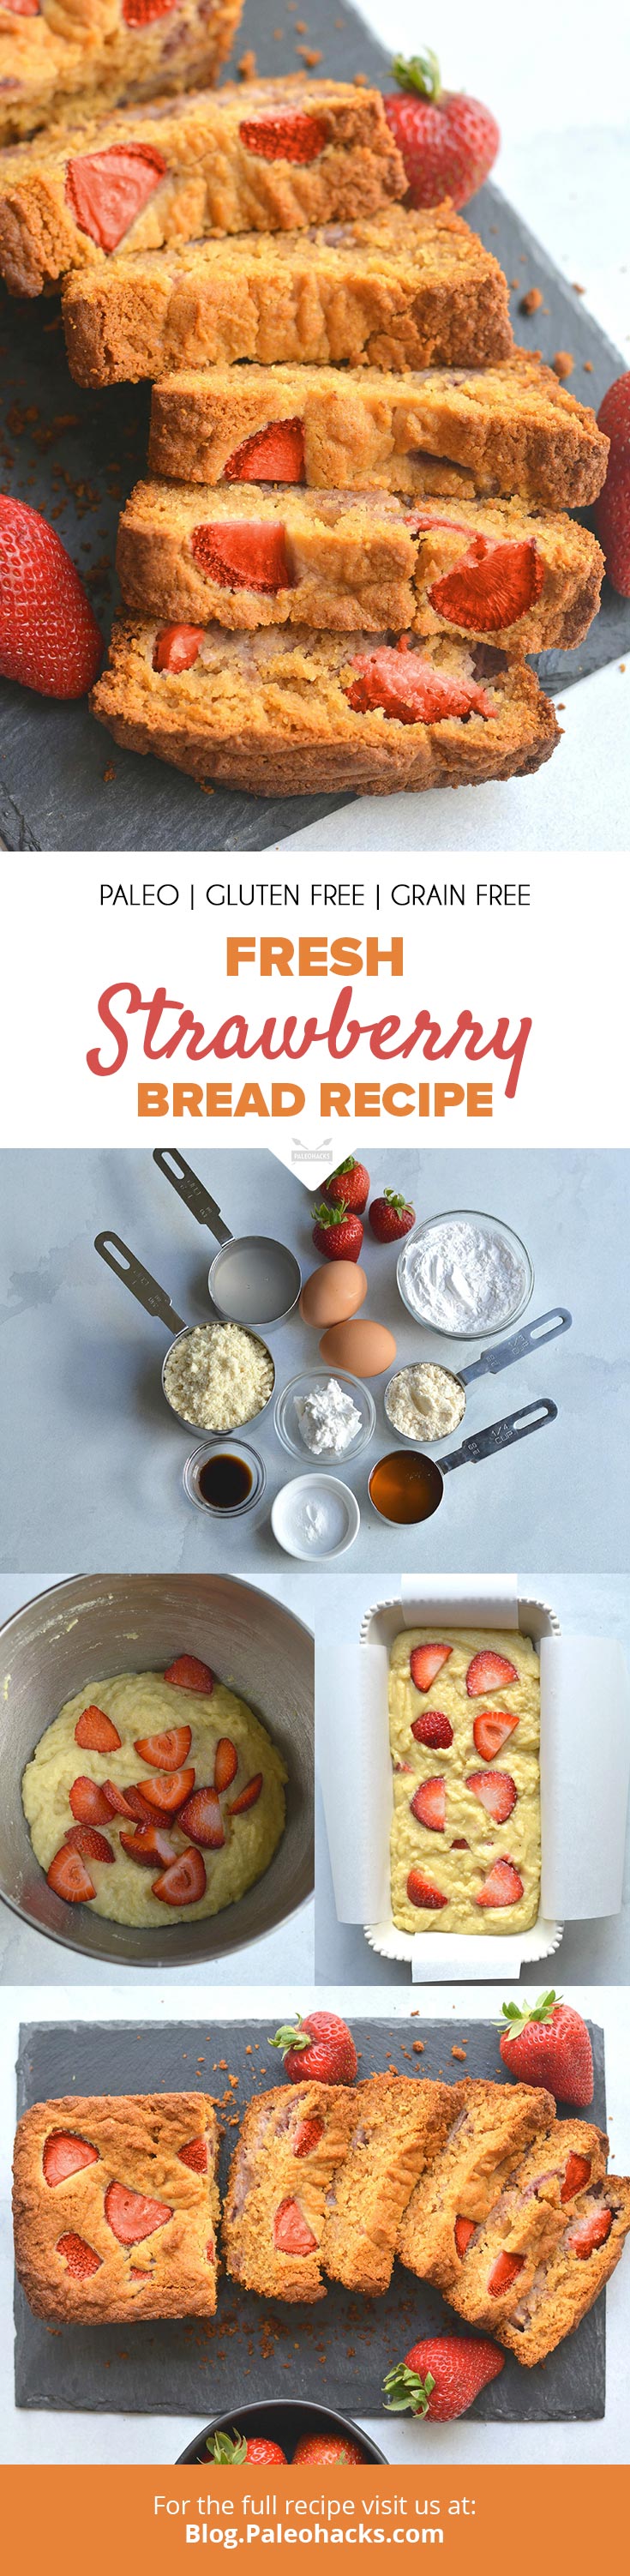 Slather this gluten-free Strawberry Bread with your favorite jam or buttery ghee for breakfast. It's light, sweet, and packed with antioxidants.